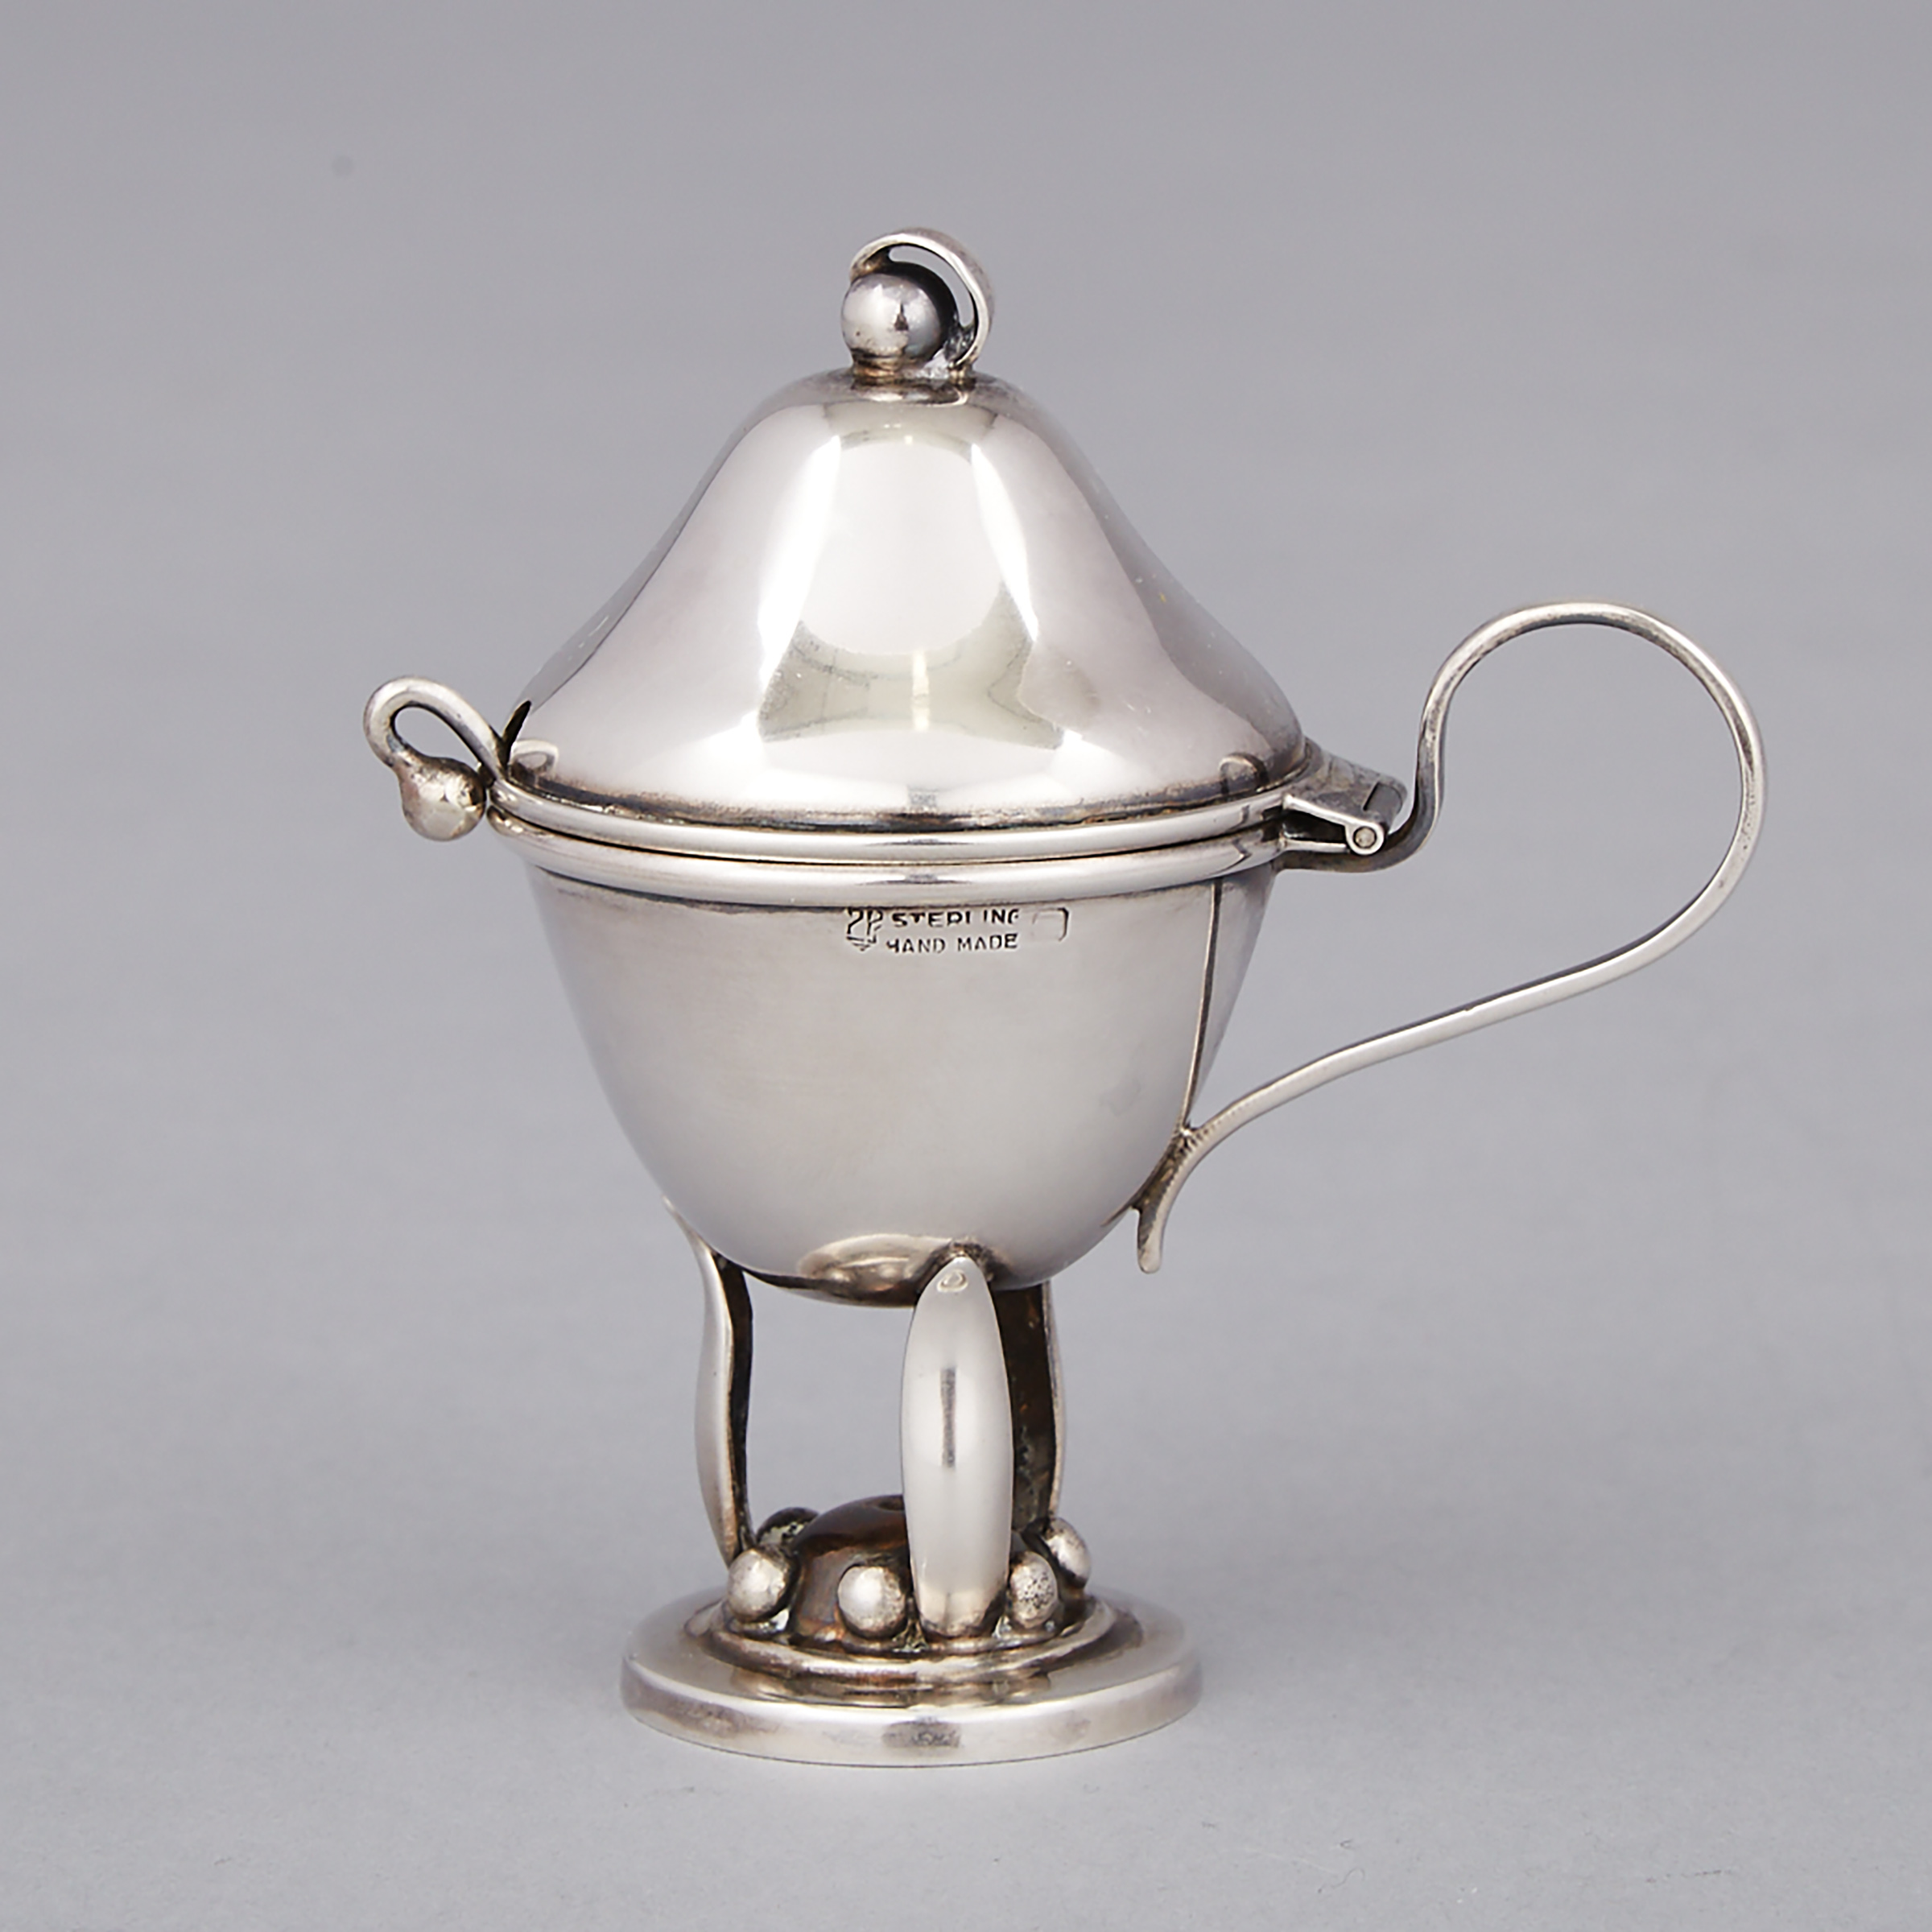 Canadian Silver Mustard Pot with Spoon, Carl Poul Petersen, Montreal, Que., mid-20th century